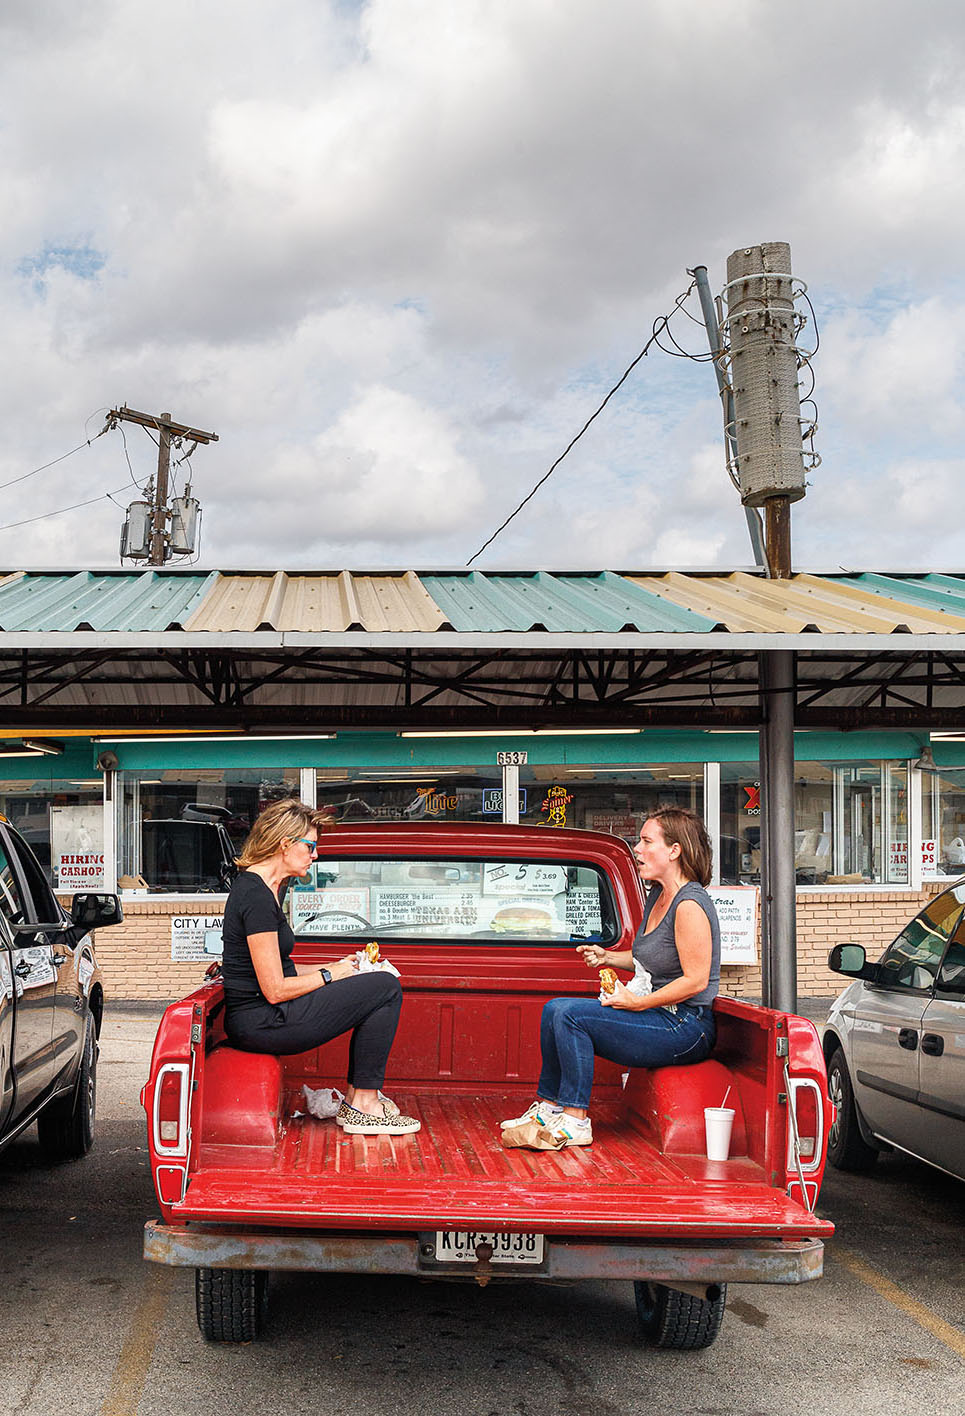 Two woman sit in the back of a red puckup truck outside of a store